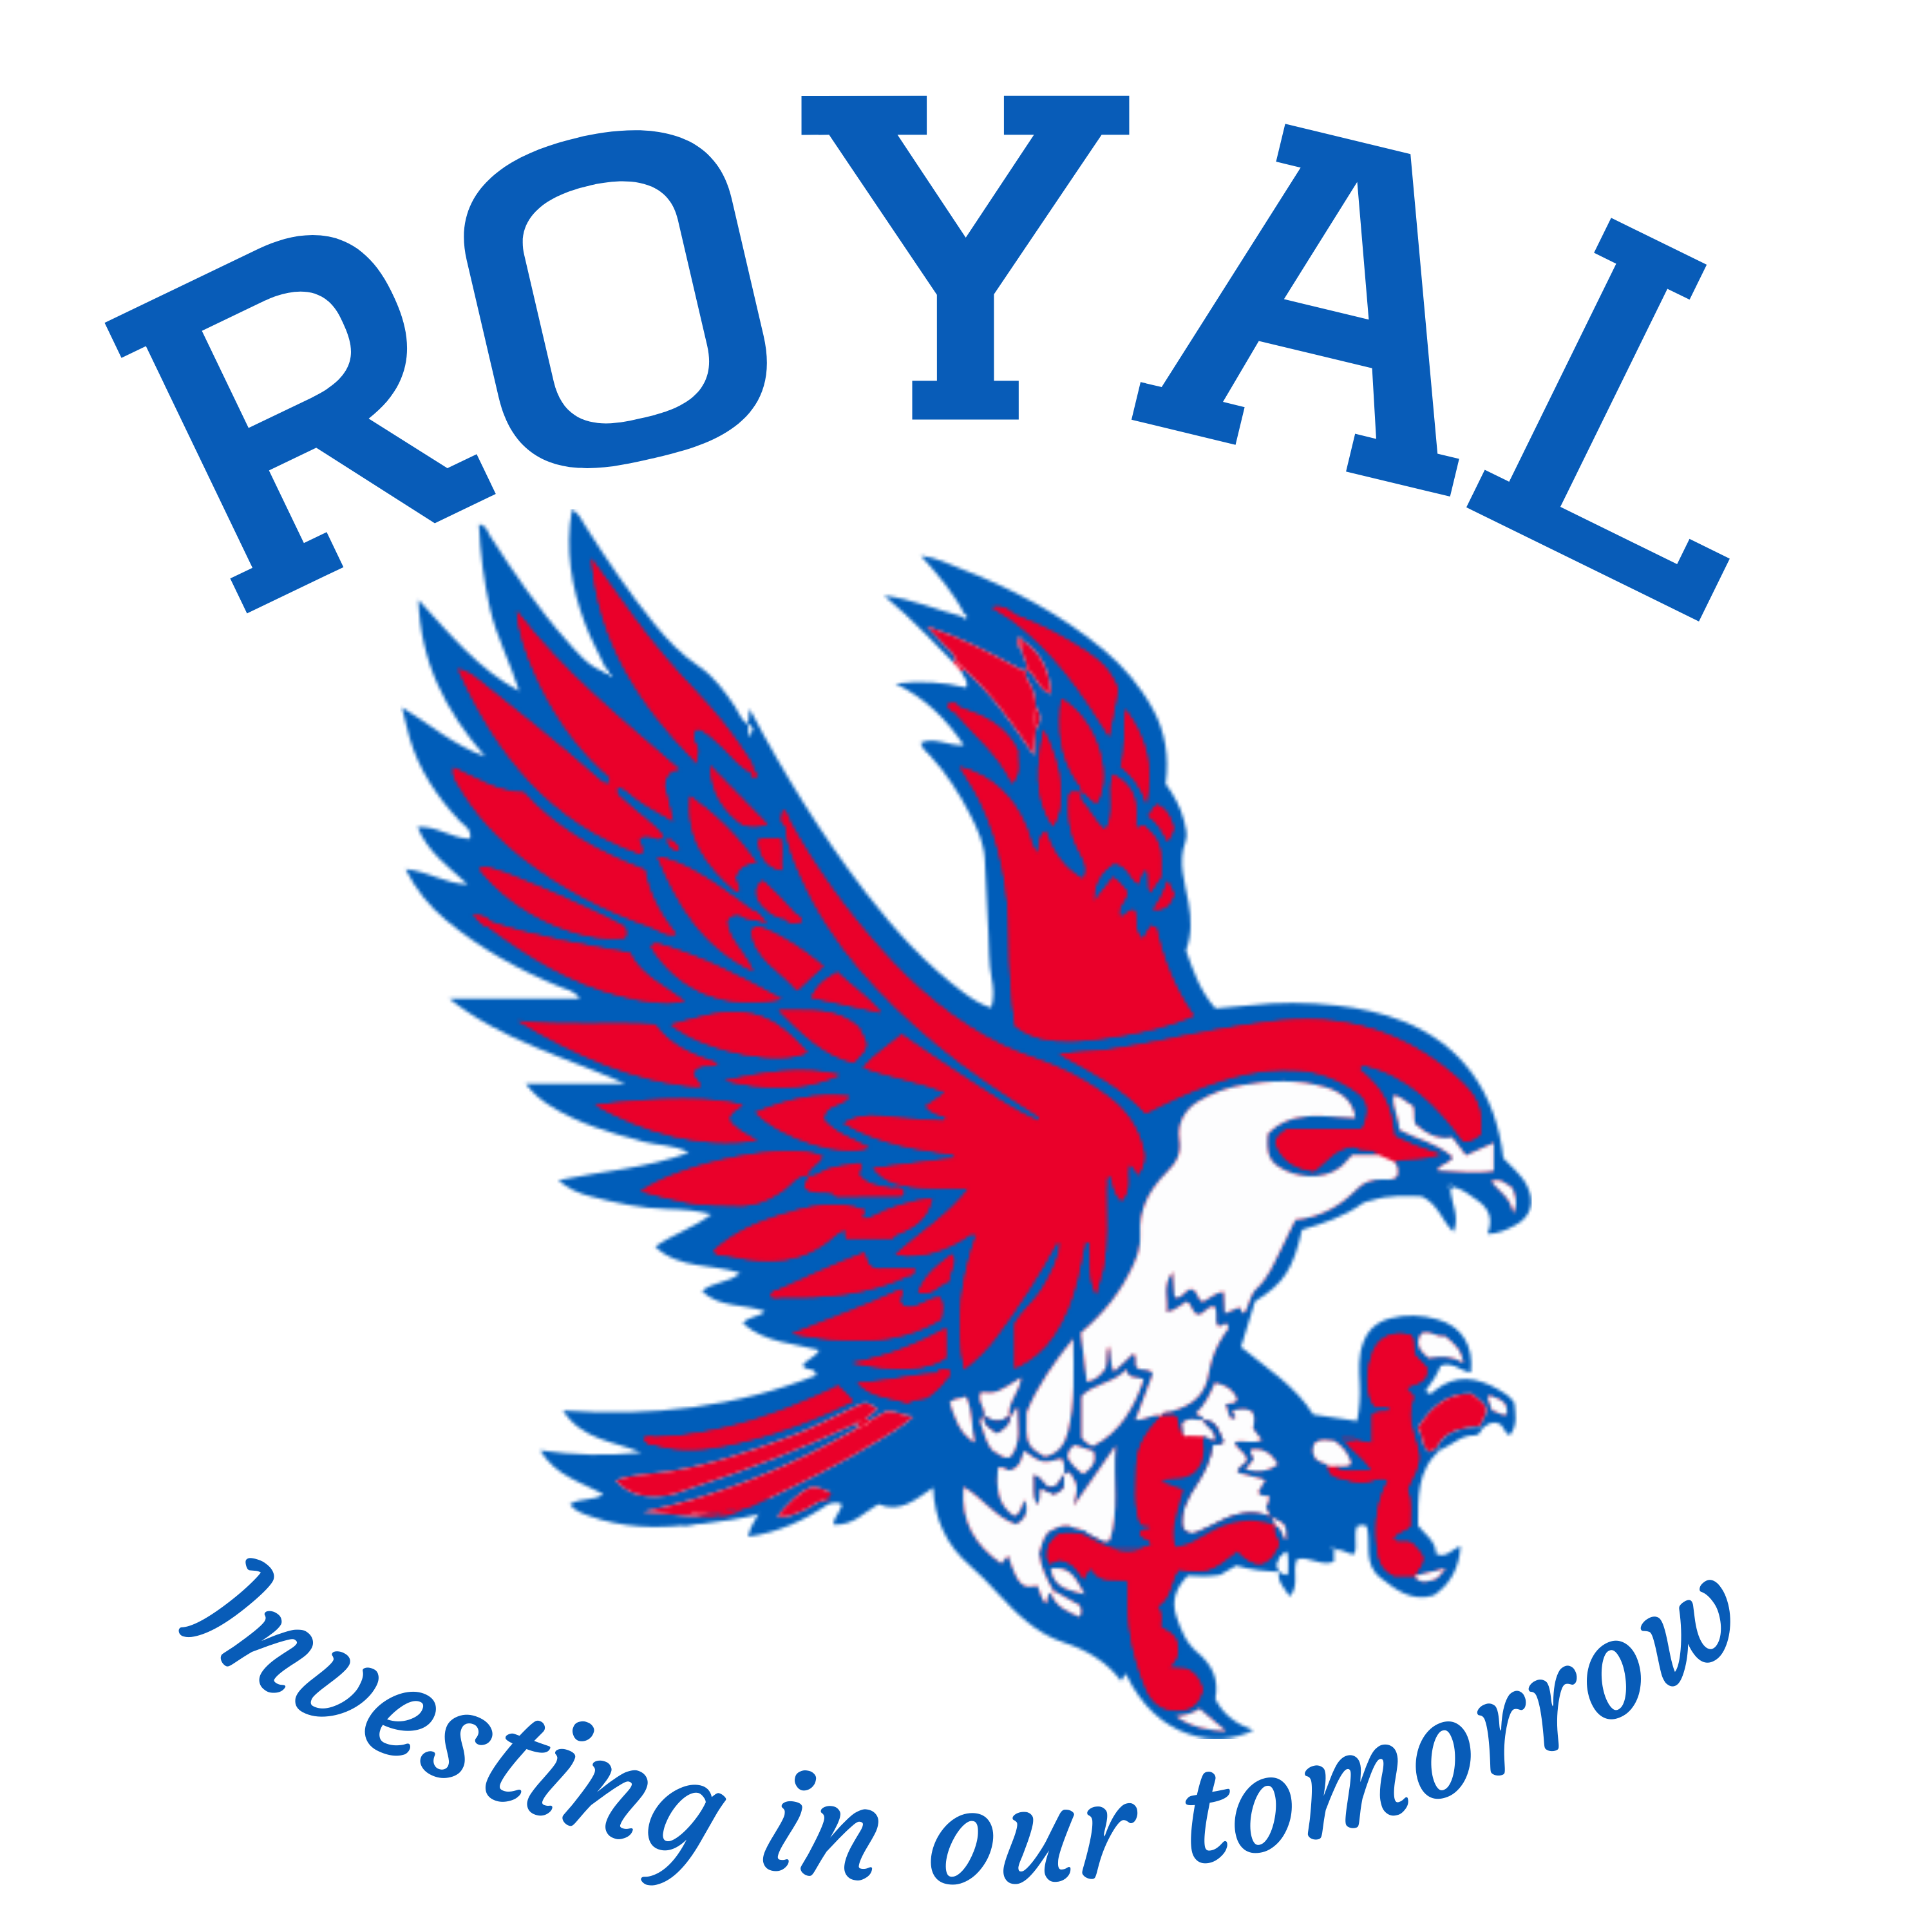 Royal ISD: Investing in Our Tomorrow